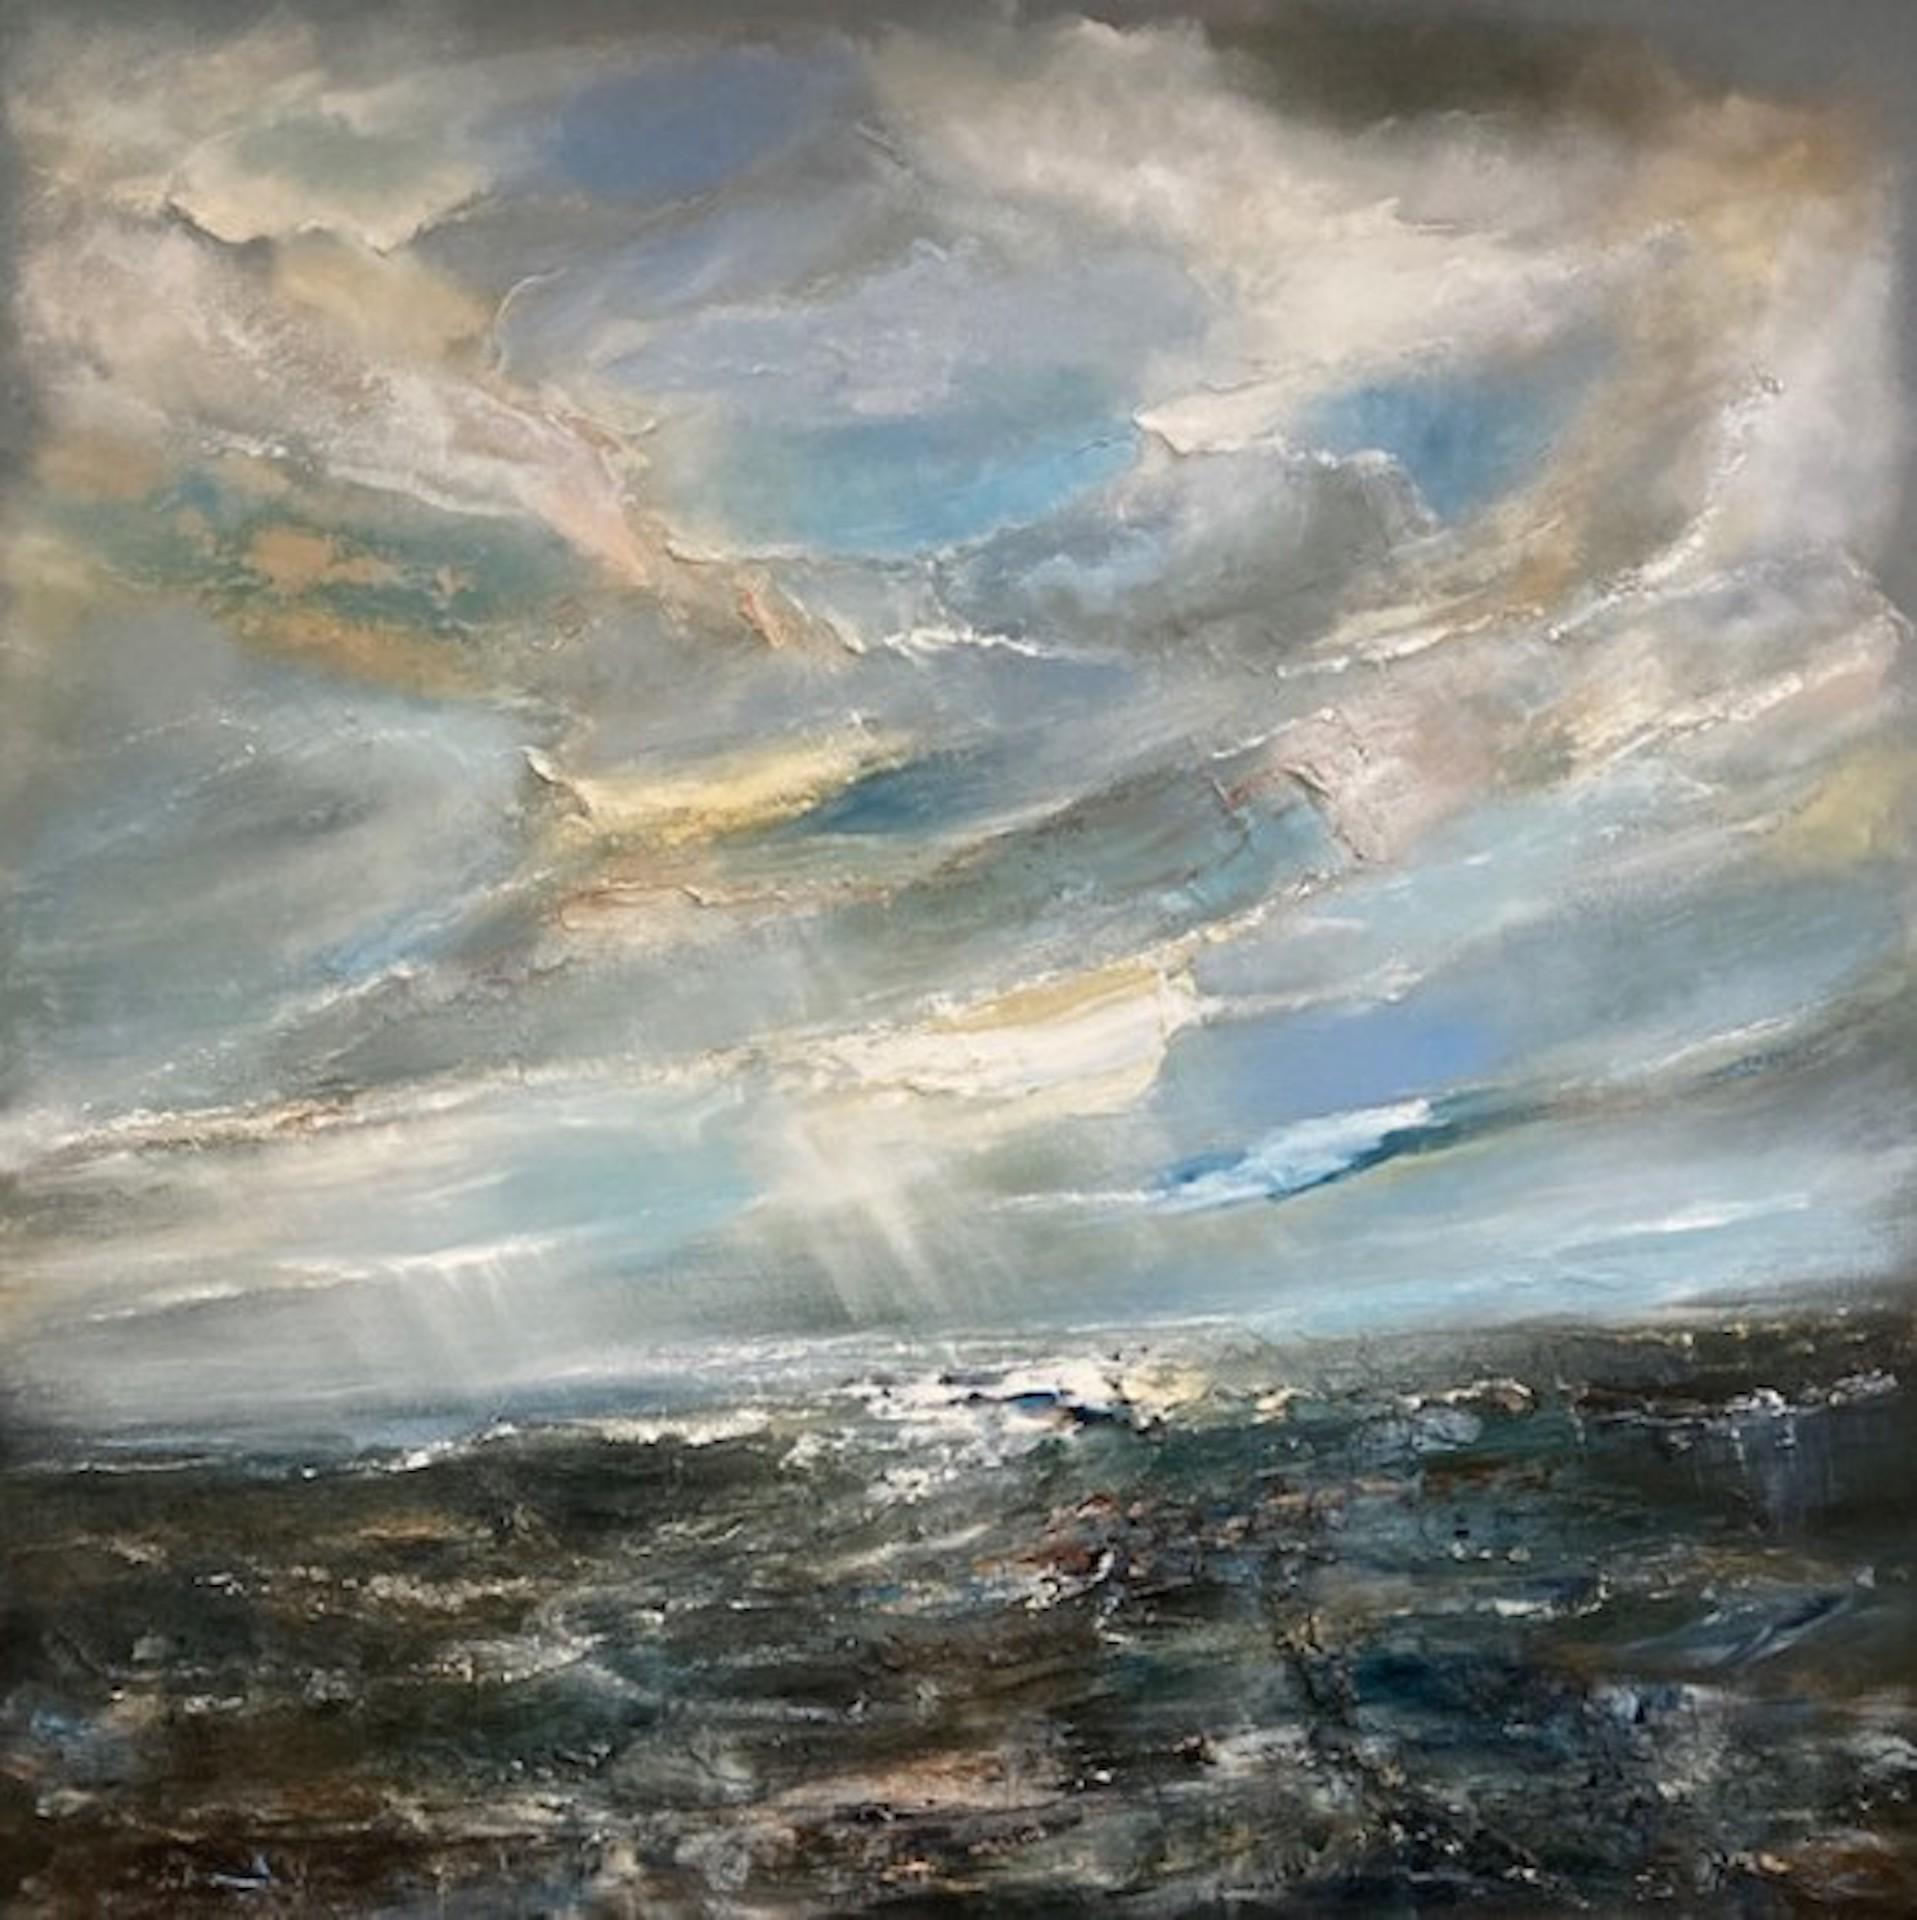 Tidal [2021]
Original
Oil on Canvas
Image size: H:91 cm x W:91 cm
Complete Size of Unframed Work: H:91 cm x W:91 cm x D:3.5cm
Sold Unframed
Please note that insitu images are purely an indication of how a piece may look

Tidal is an original